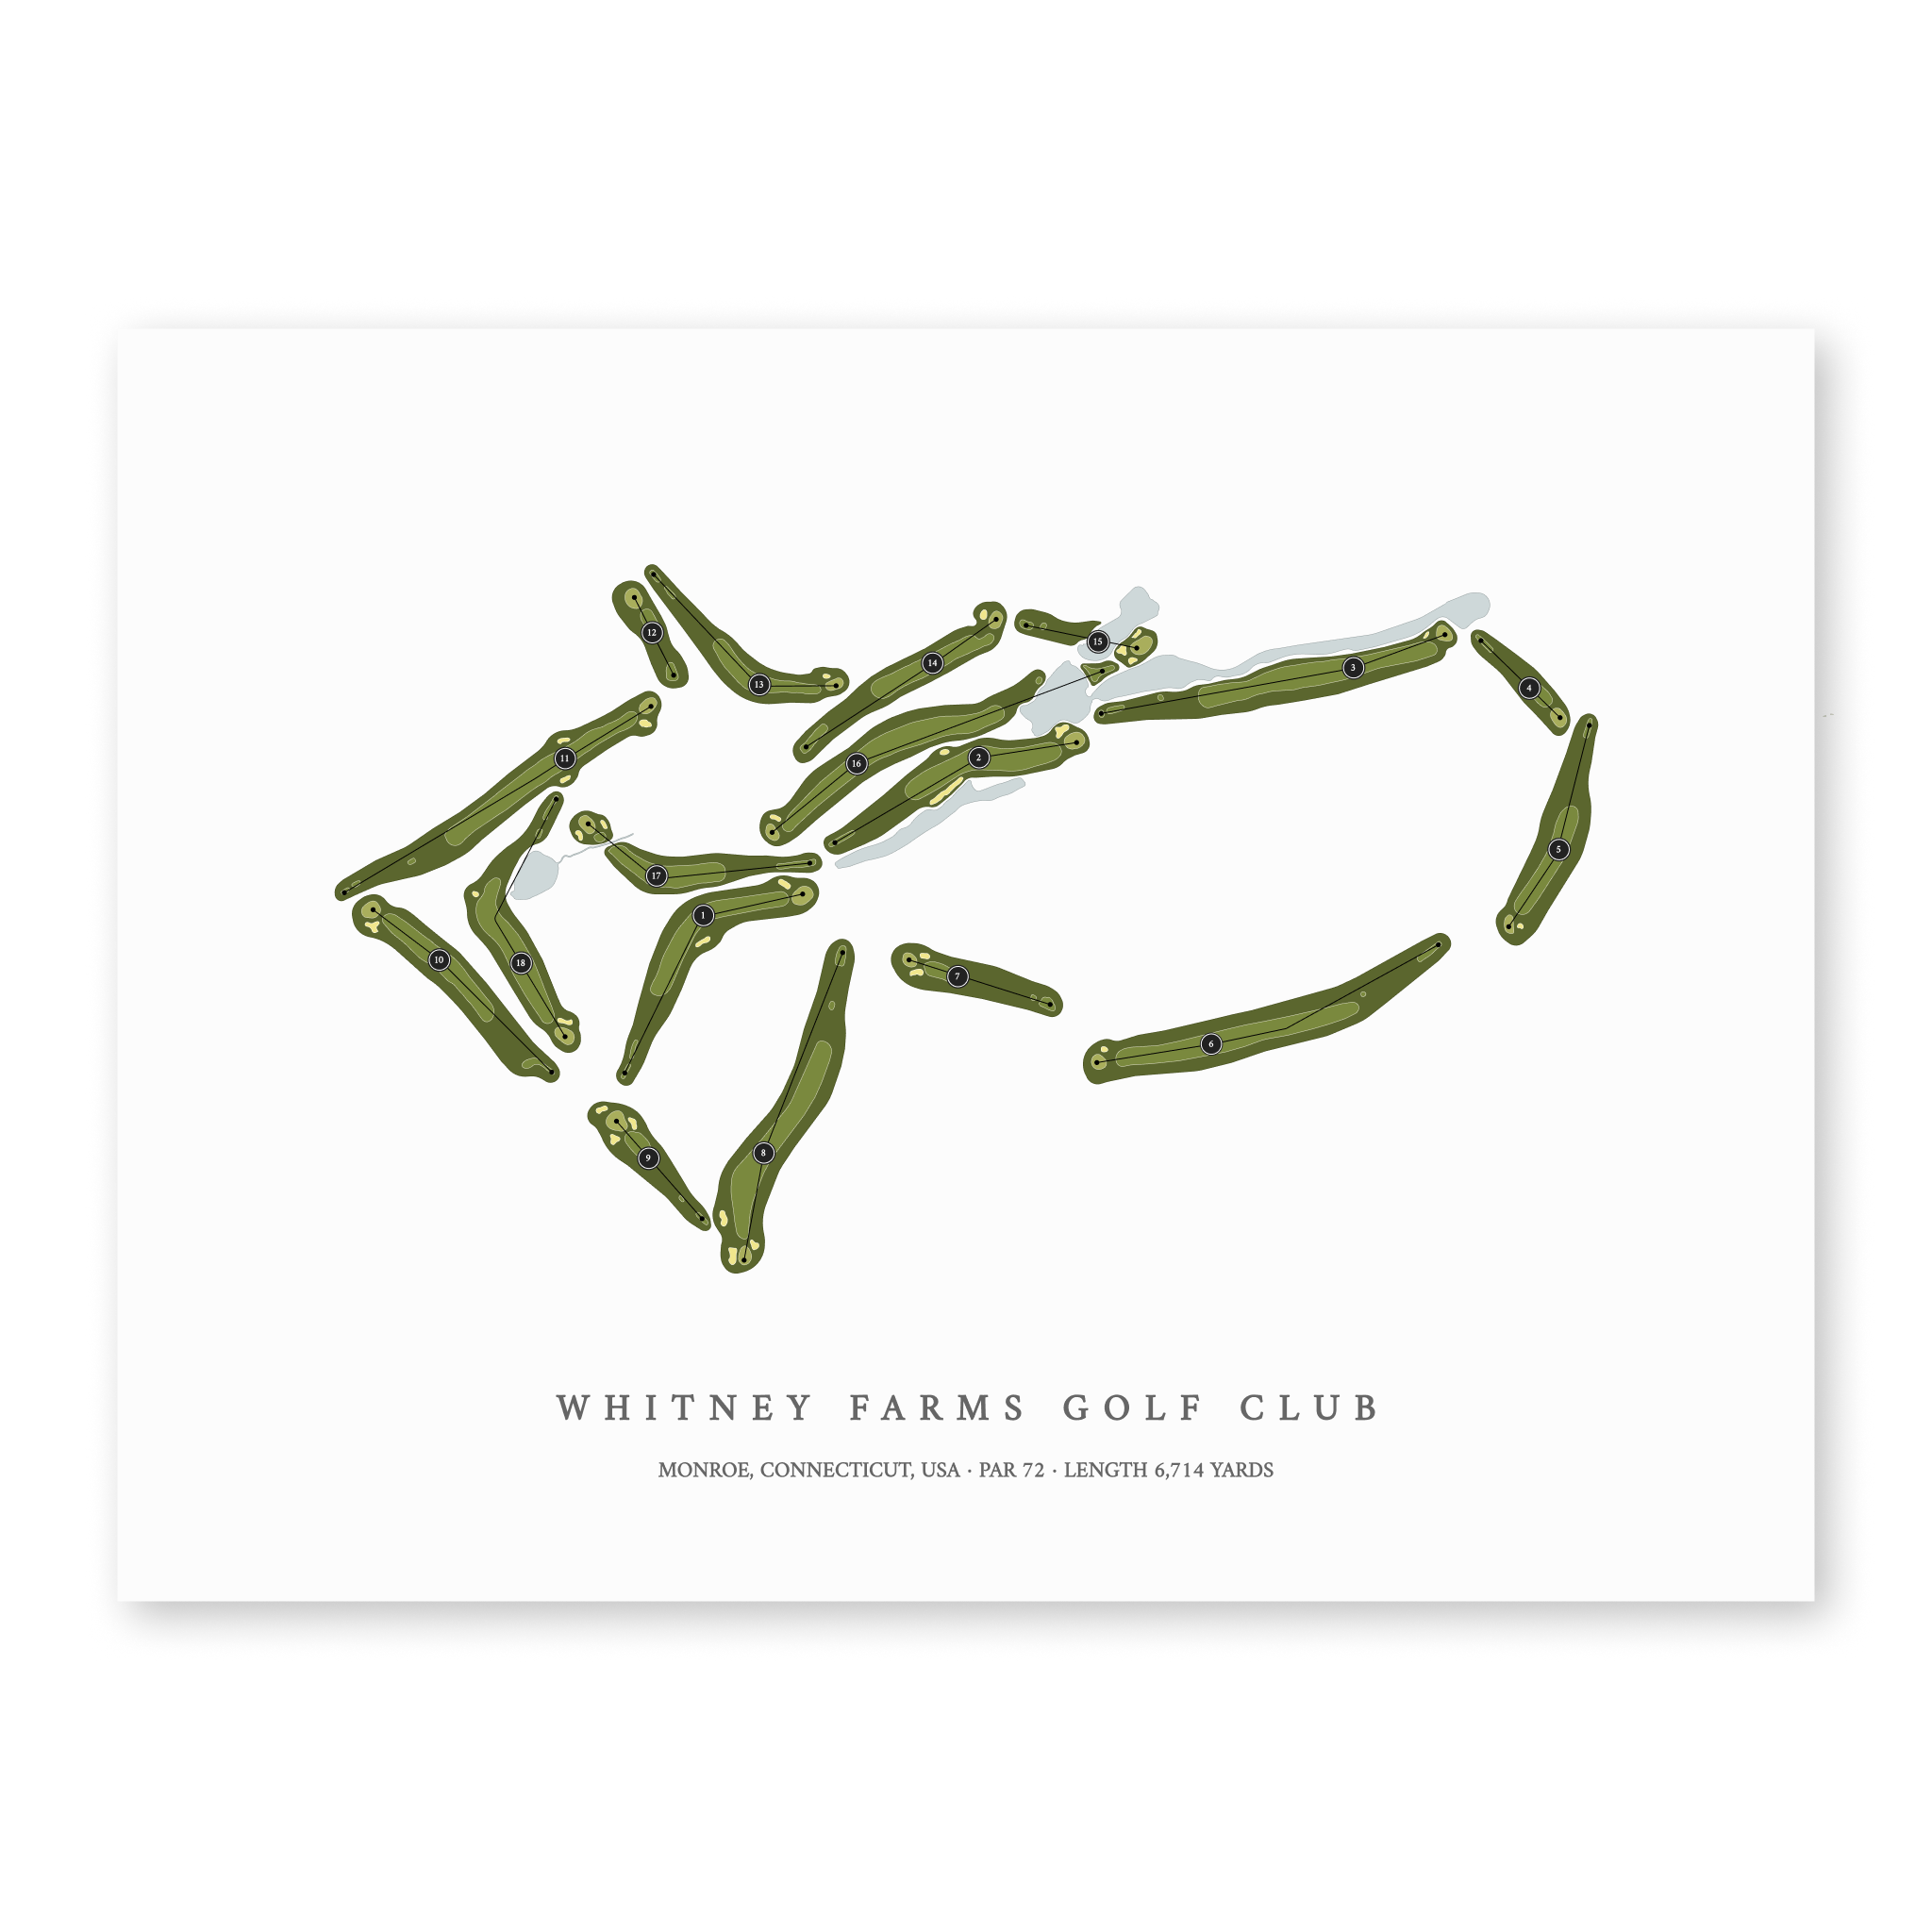 Whitney Farms Golf Club| Golf Course Print | Unframed With Hole Numbers #hole numbers_yes